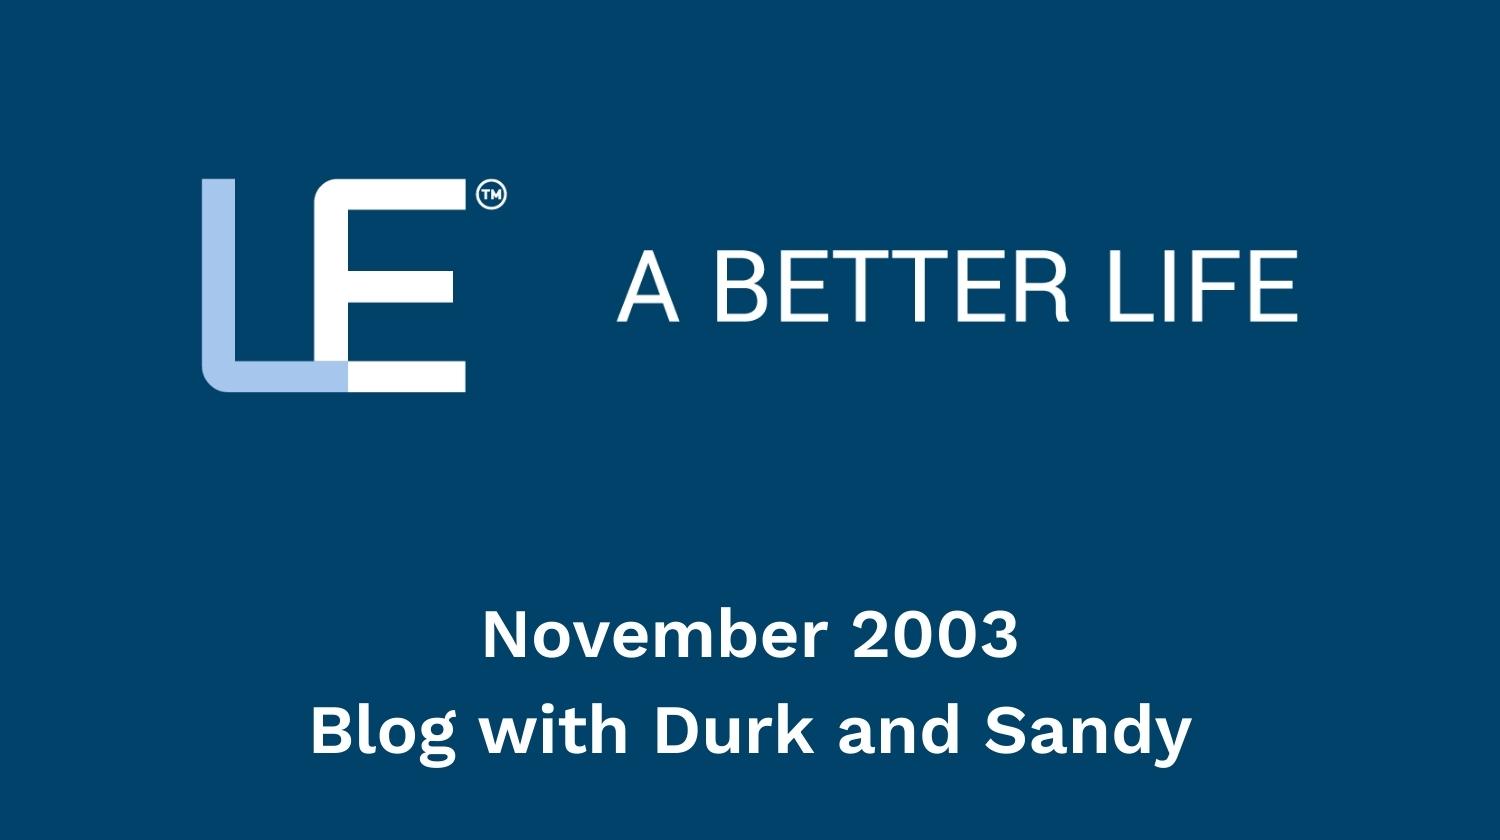 November 2003 Blog with Durk and Sandy